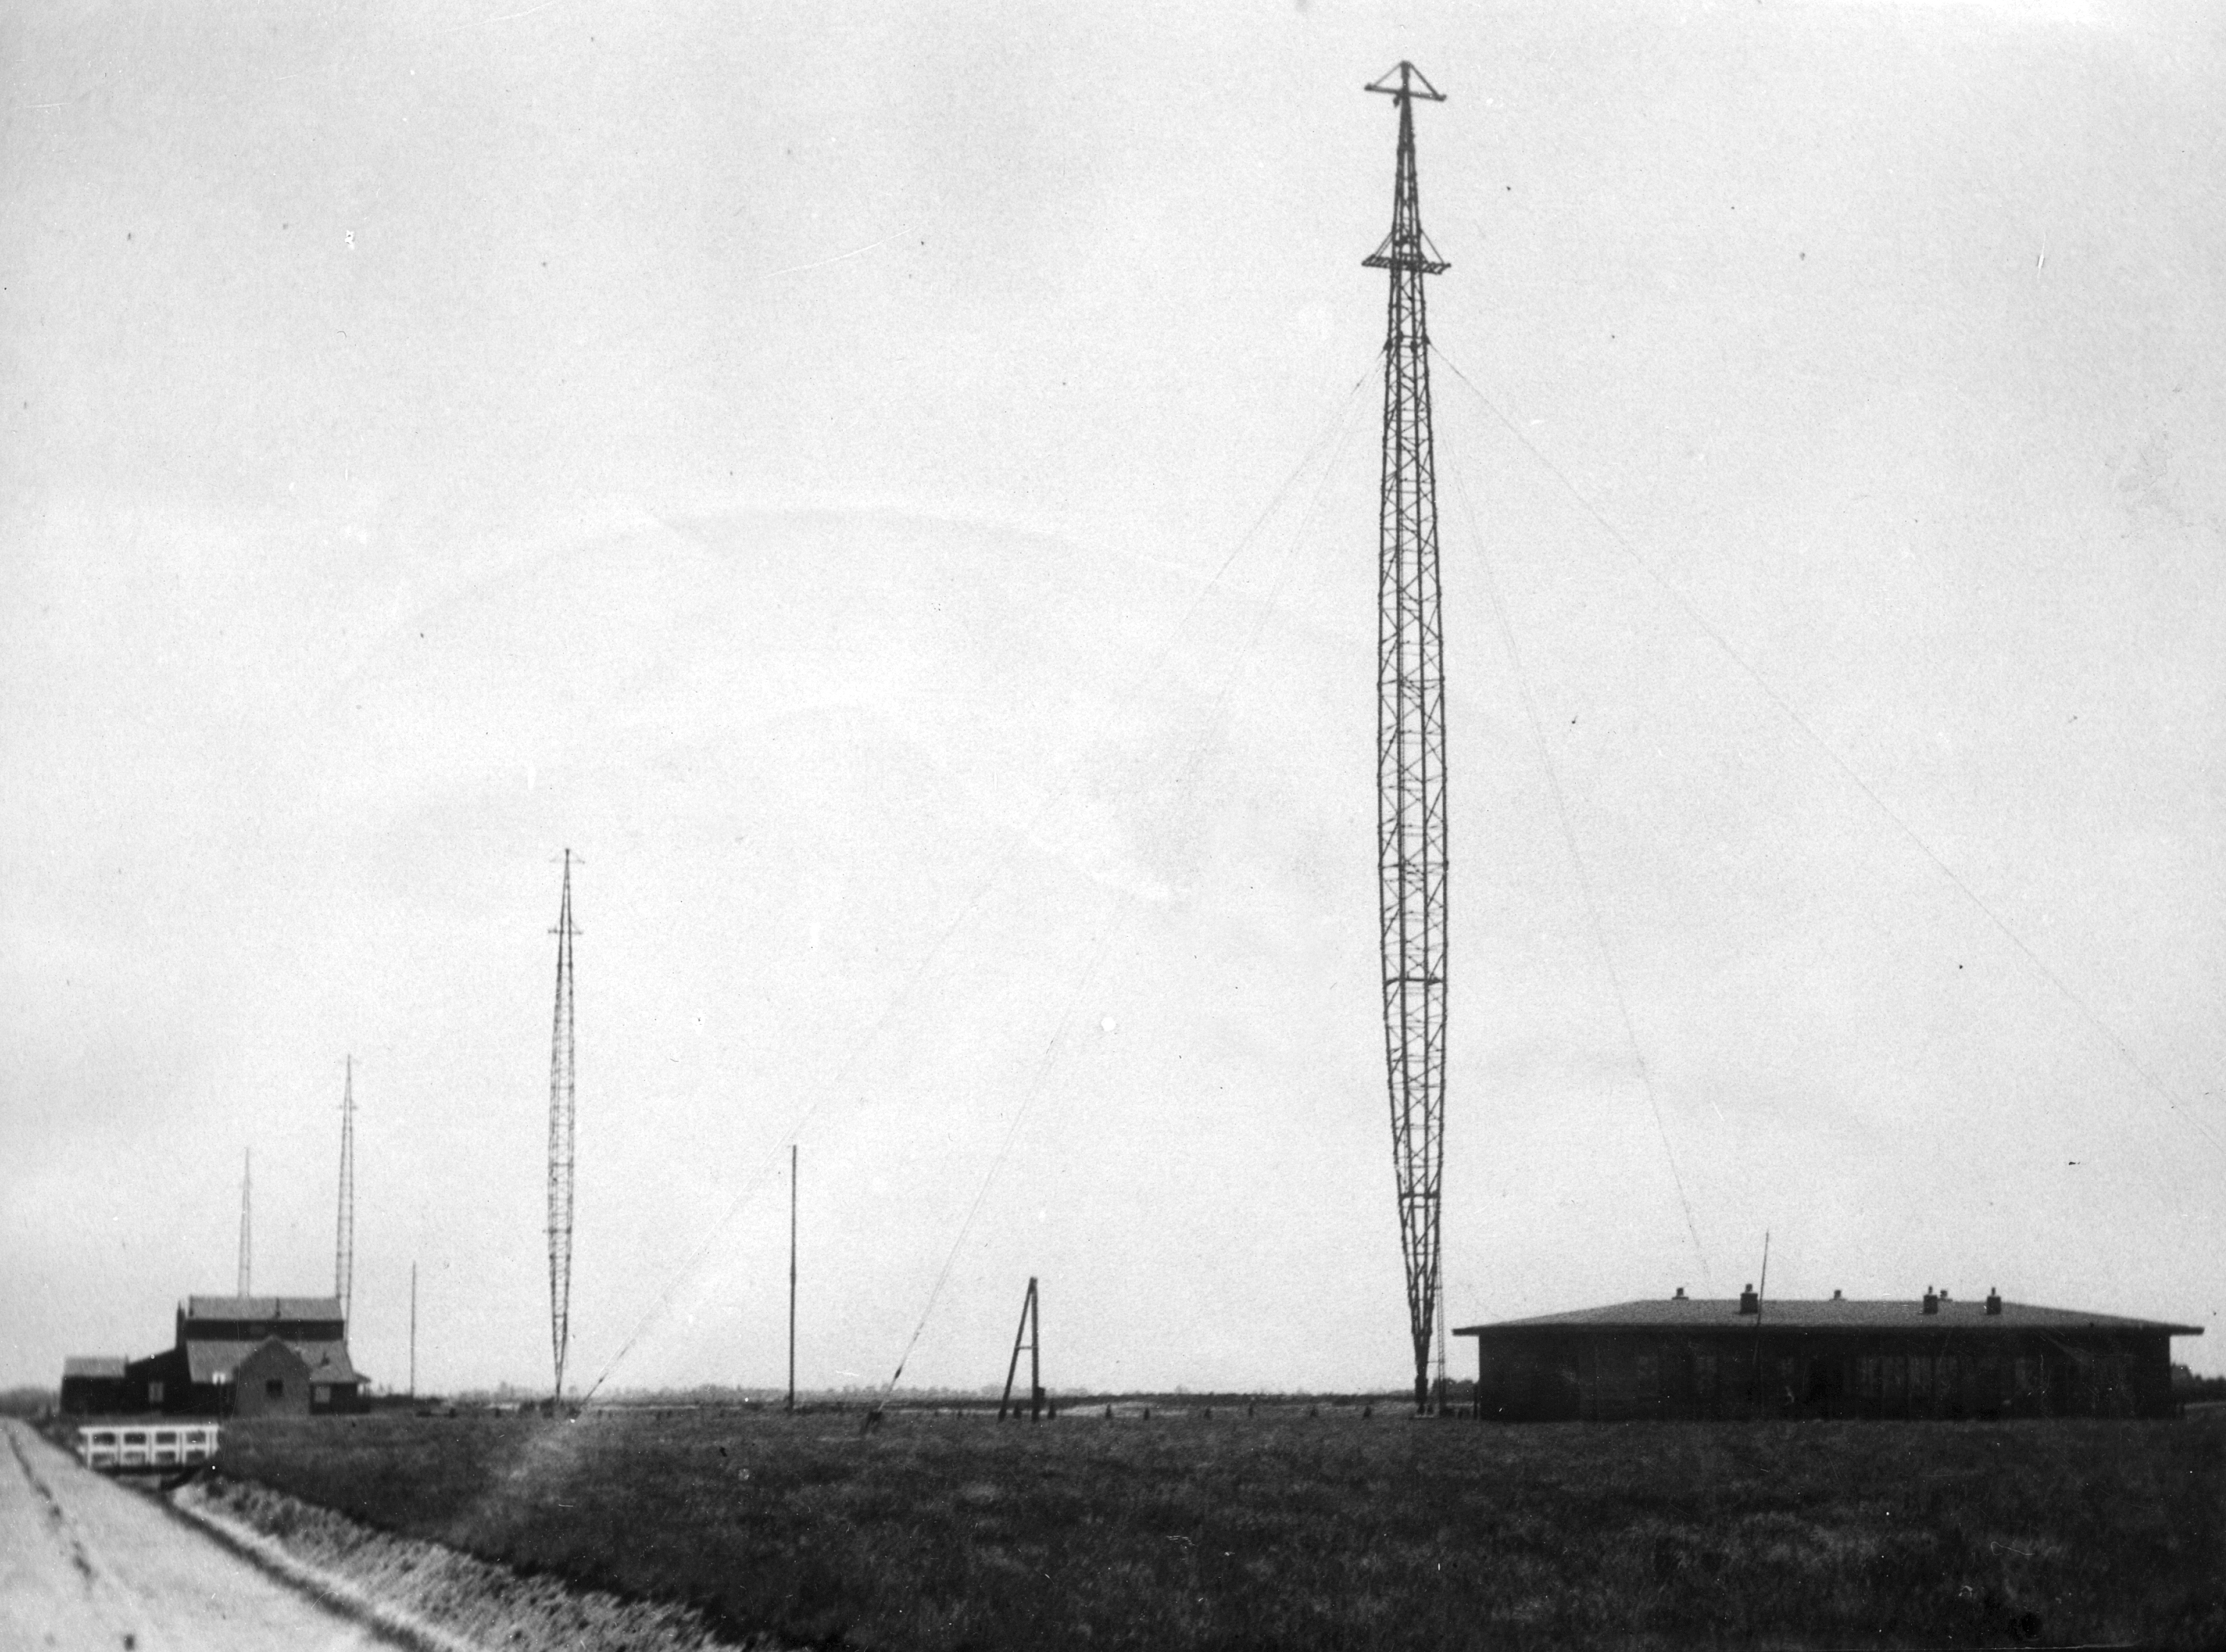 <span class='captionassign1'><i class='bi bi-plus-circle' ></i></span><br><strong>Reception station Sambeek</strong><br>Overview masts